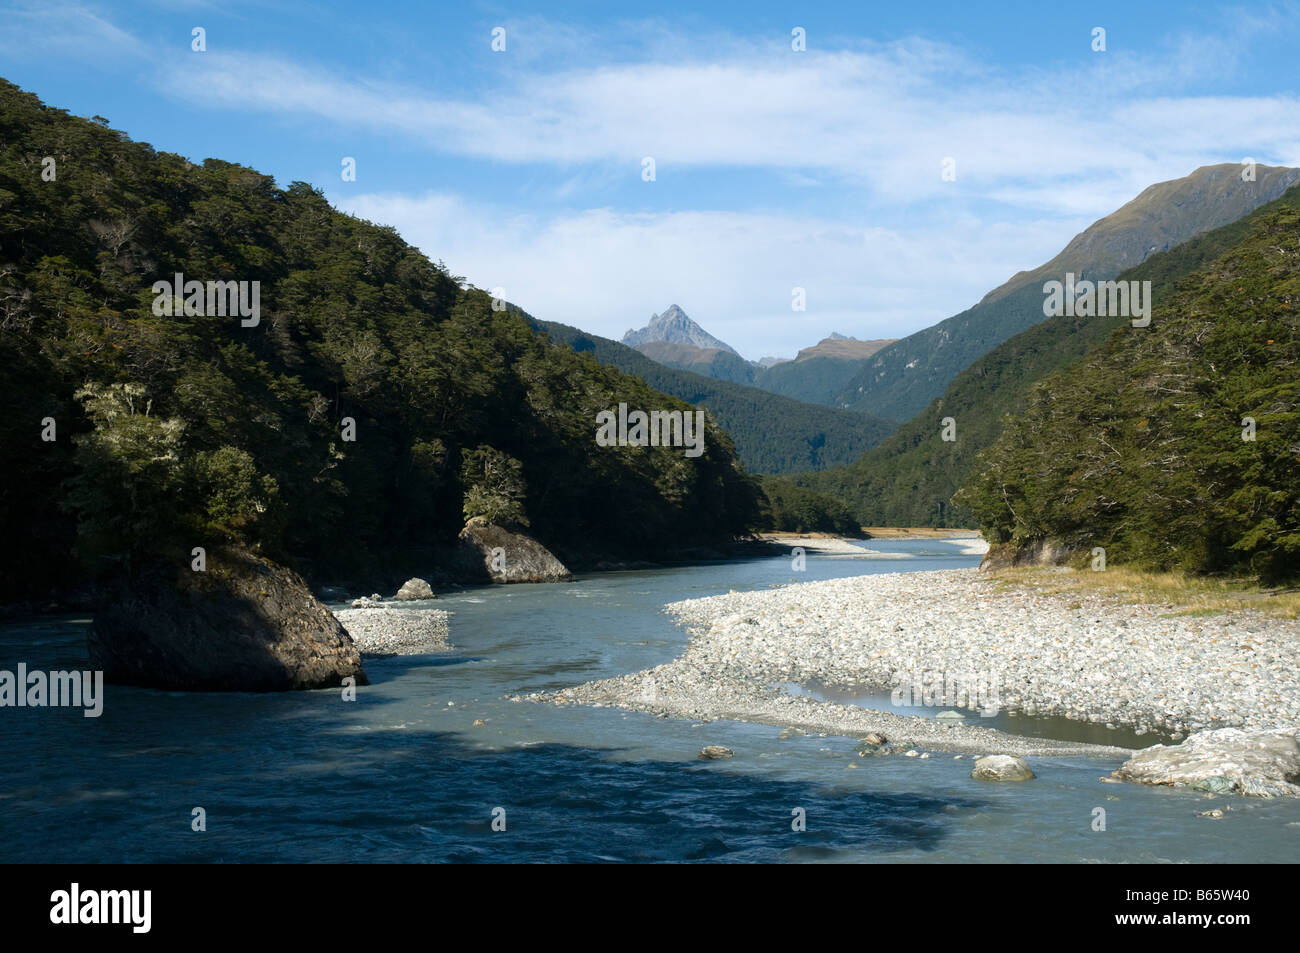 The Dart River valley, Rees Dart track, Mount Aspiring National Park, South Island, New Zealand Stock Photo